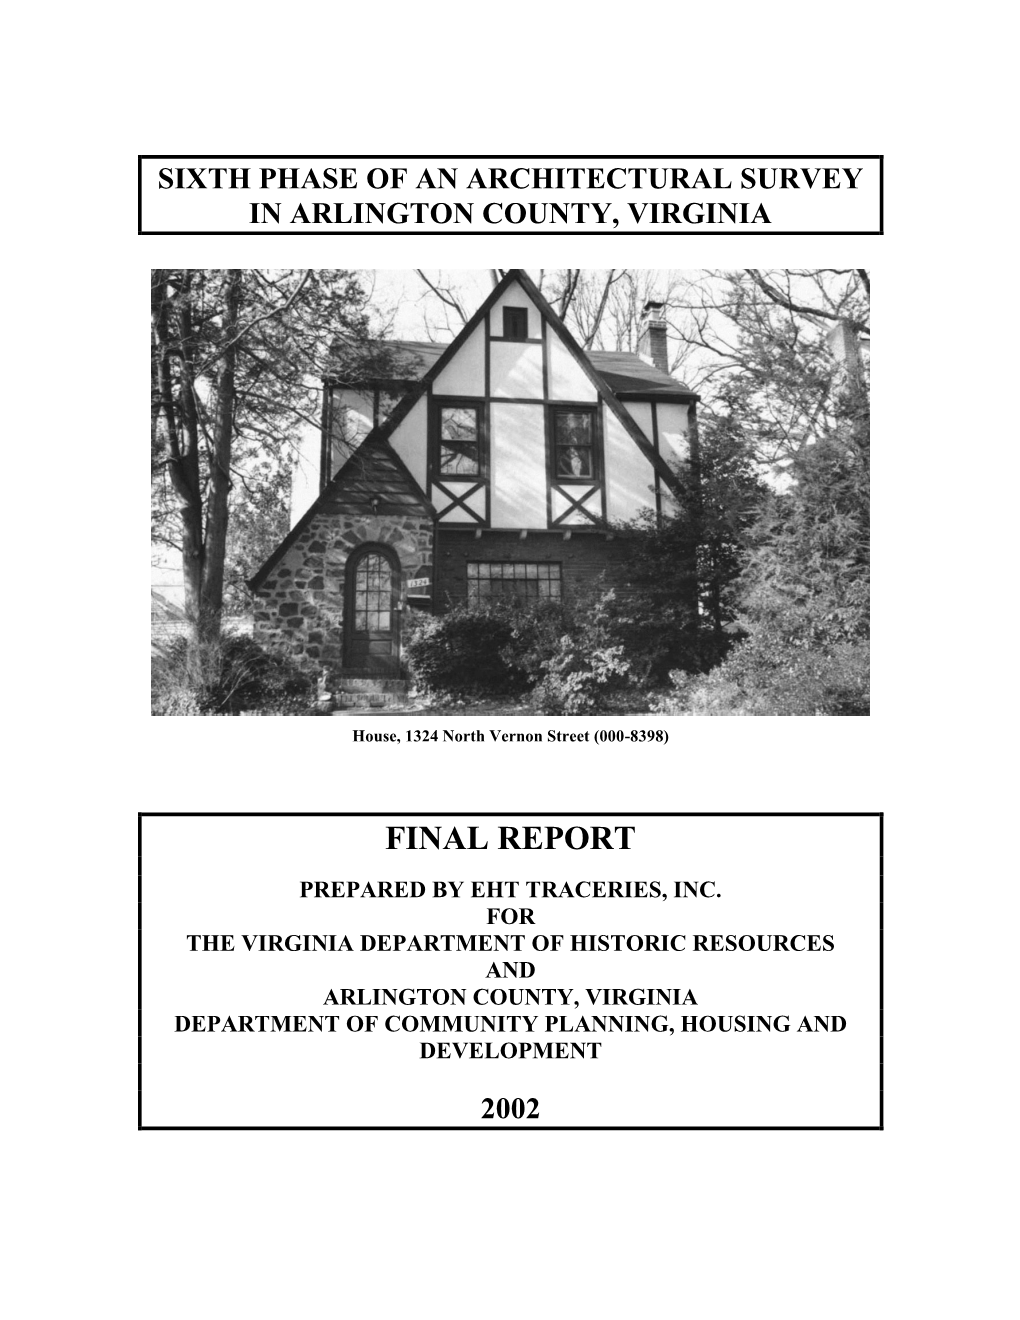 Sixth Phase of an Architectural Survey in Arlington County, Virginia